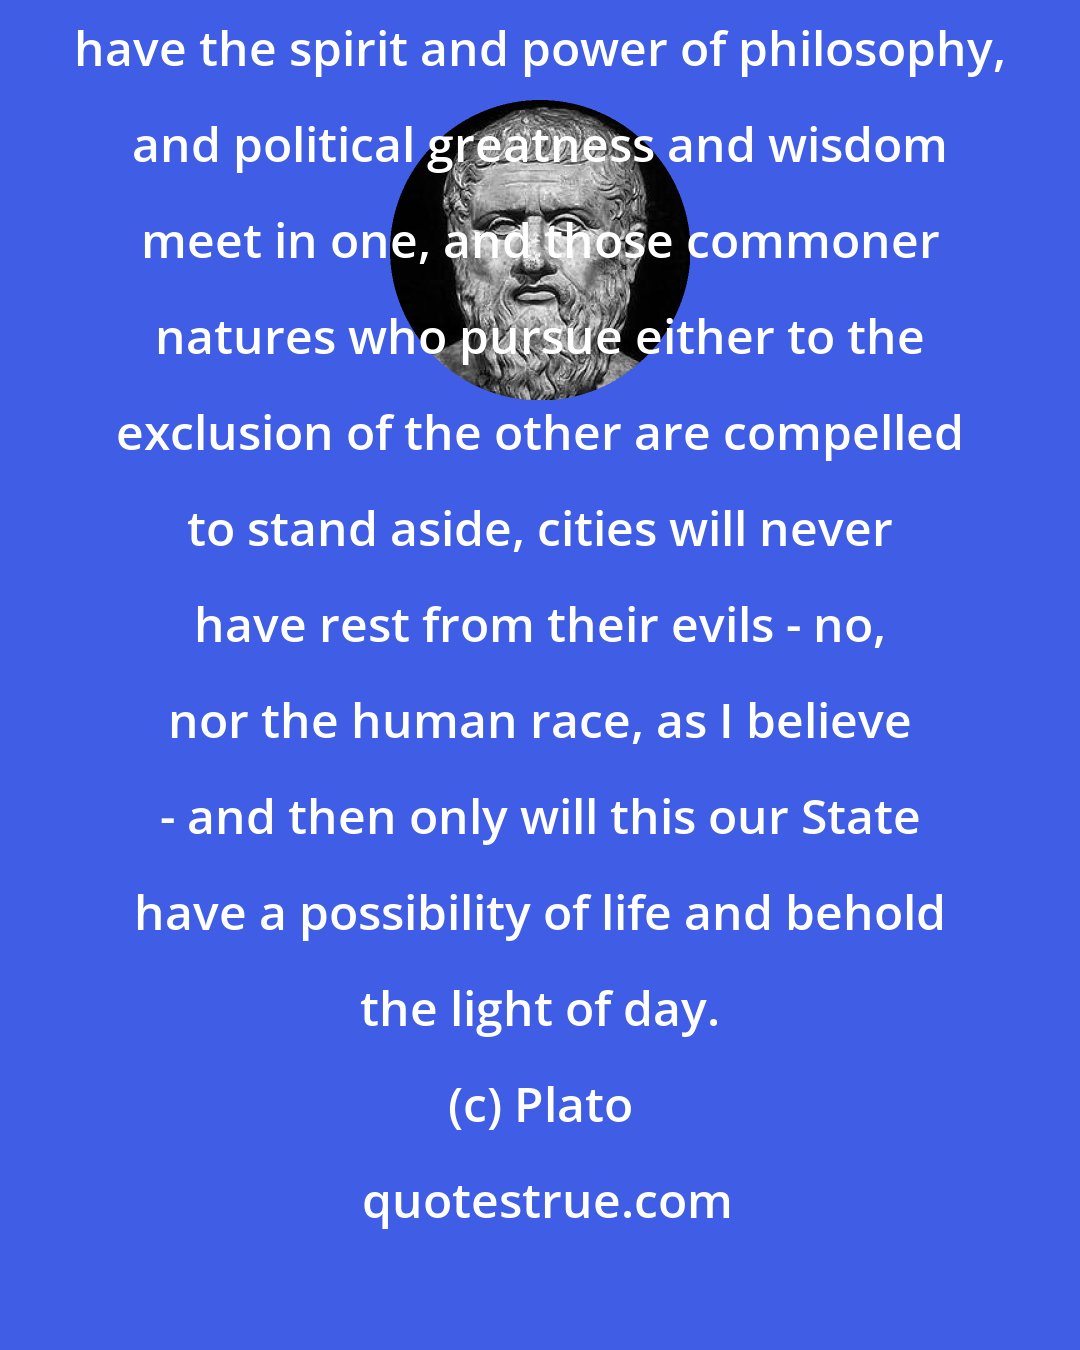 Plato: Until philosophers are kings, or the kings and princes of this world have the spirit and power of philosophy, and political greatness and wisdom meet in one, and those commoner natures who pursue either to the exclusion of the other are compelled to stand aside, cities will never have rest from their evils - no, nor the human race, as I believe - and then only will this our State have a possibility of life and behold the light of day.